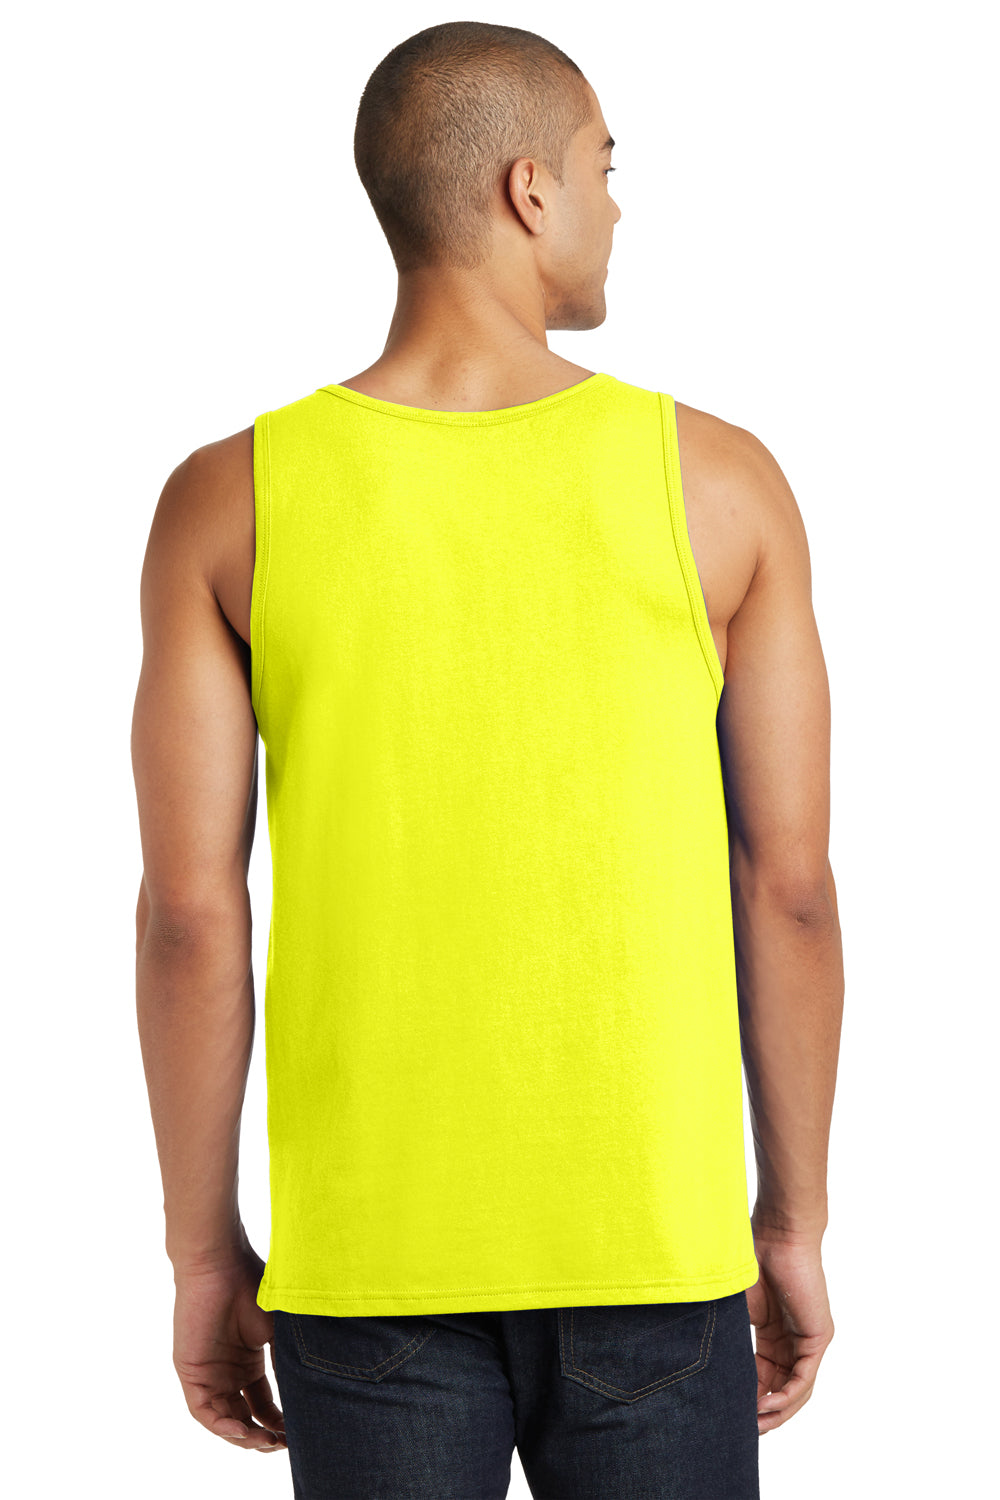 District DT5300 Mens The Concert Tank Top Neon Yellow Back